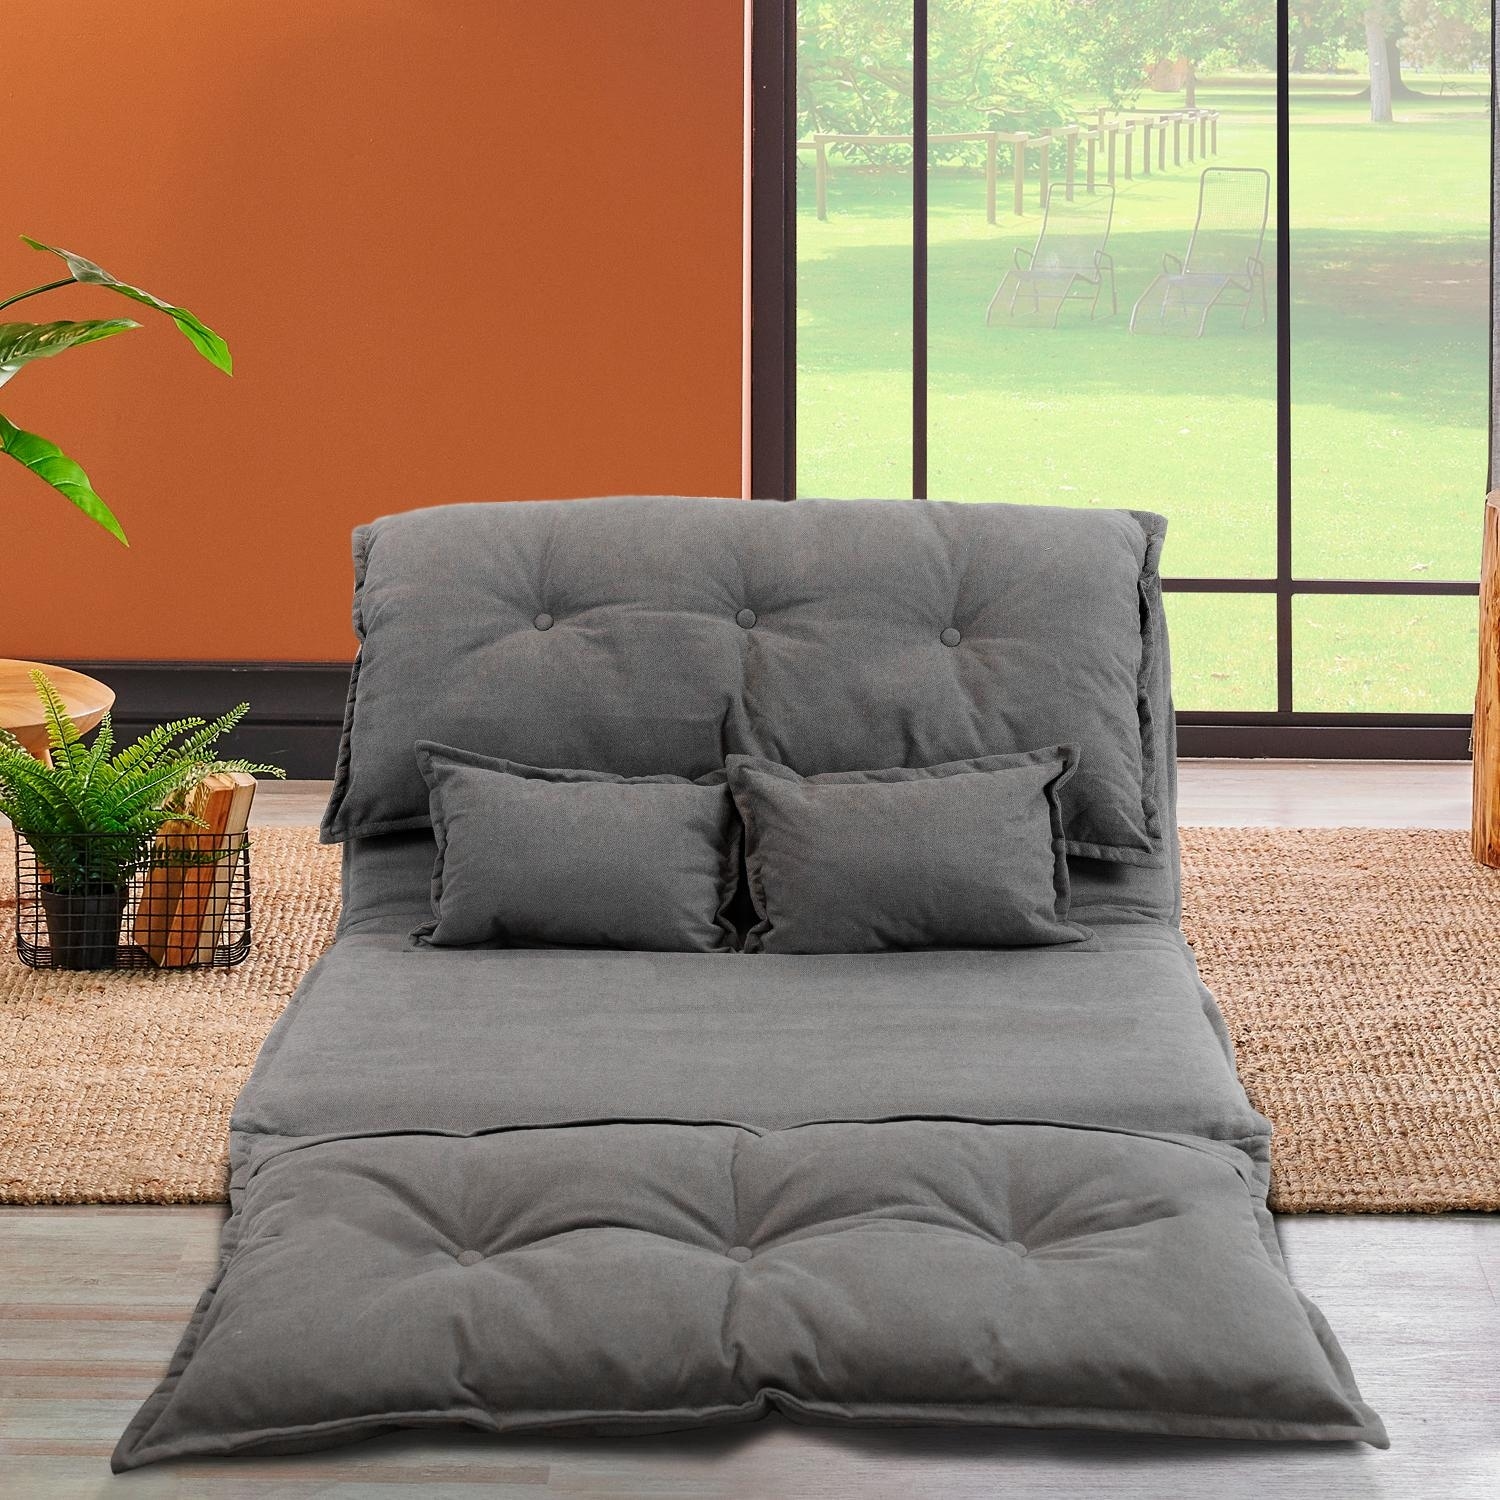 https://ak1.ostkcdn.com/images/products/is/images/direct/9fa3d58963823a9769365061100b3eeb96a4e6ea/Floor-Sofa-Bed-Cute-2-Pillows-Futons-Sets-Comfortable-Adjustable-Lazy-Sofa-TV-Floor-Gaming-Couch-Folding-Sleeping-Laying.jpg